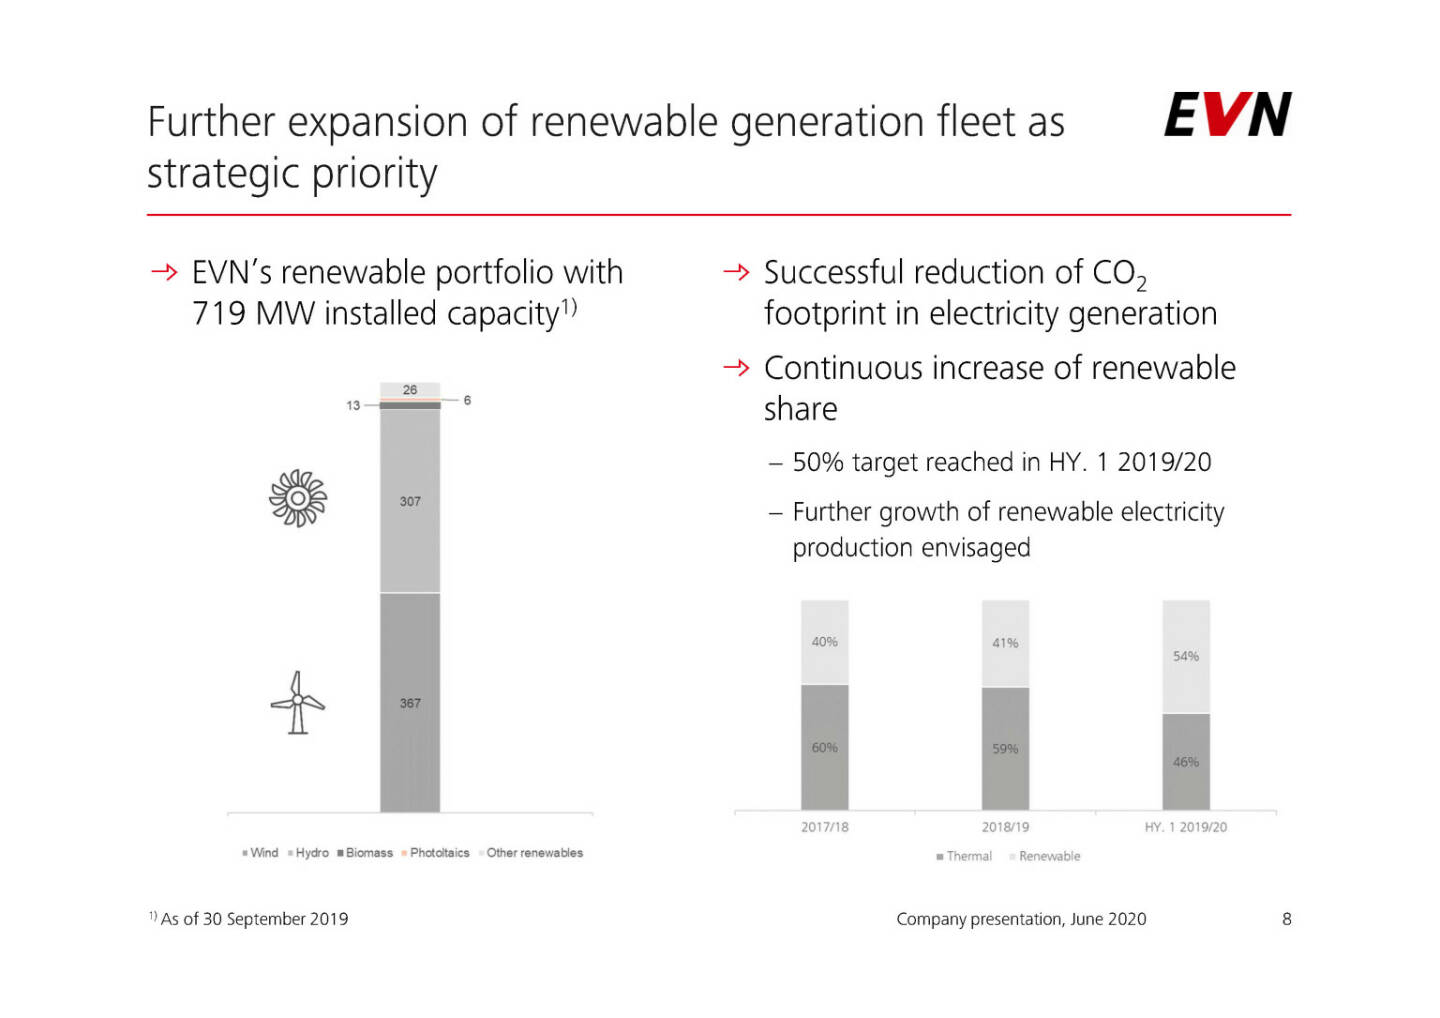 EVN - Further expansion of renewable generation fleet as strategic priority